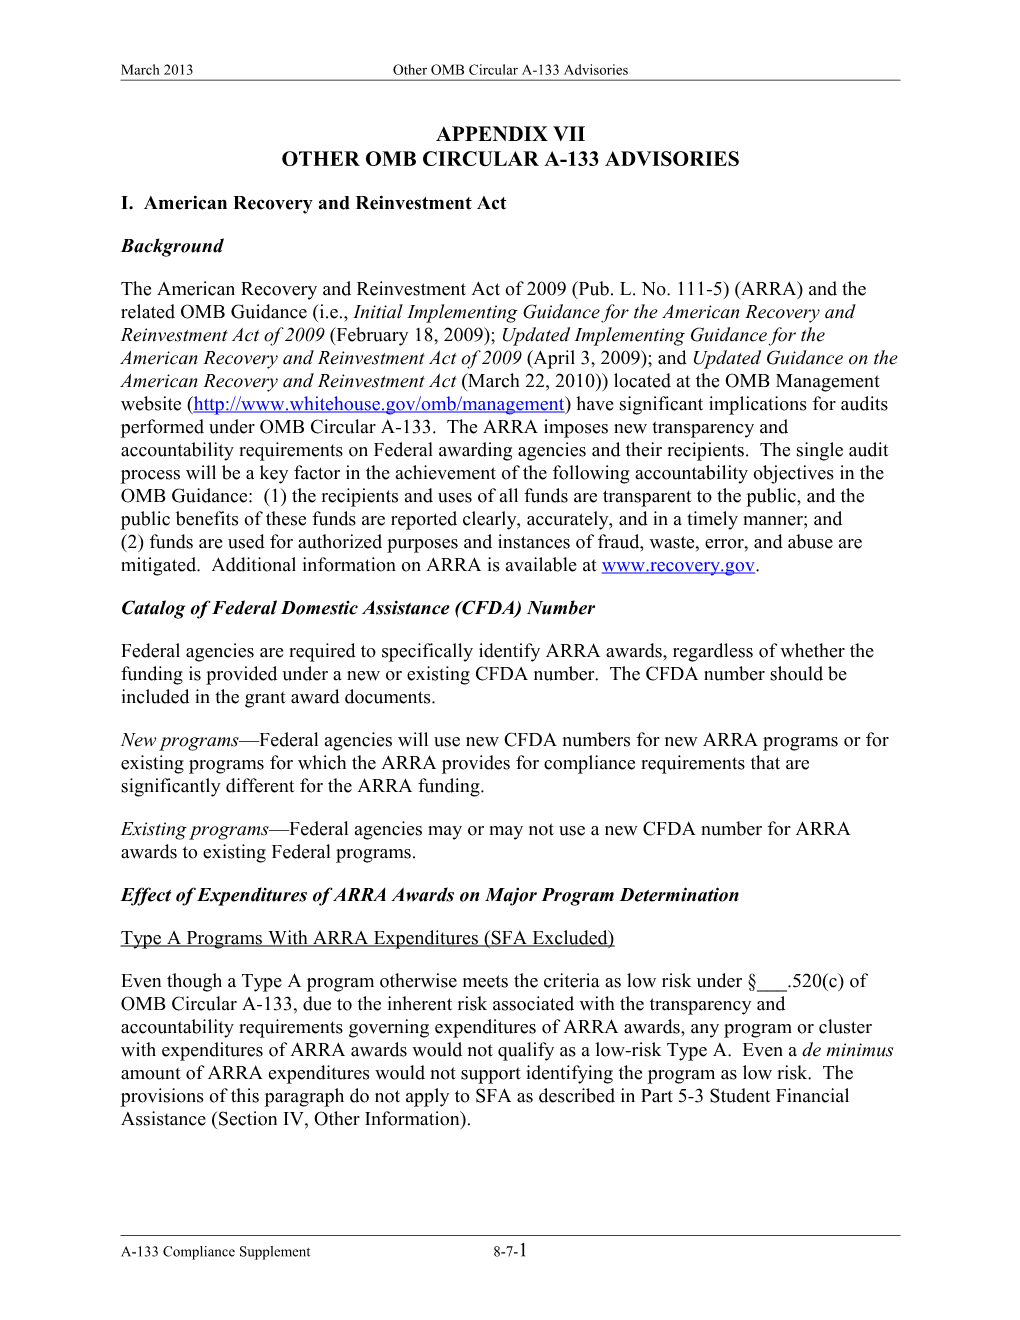 Other Omb Circular A-133 Advisories